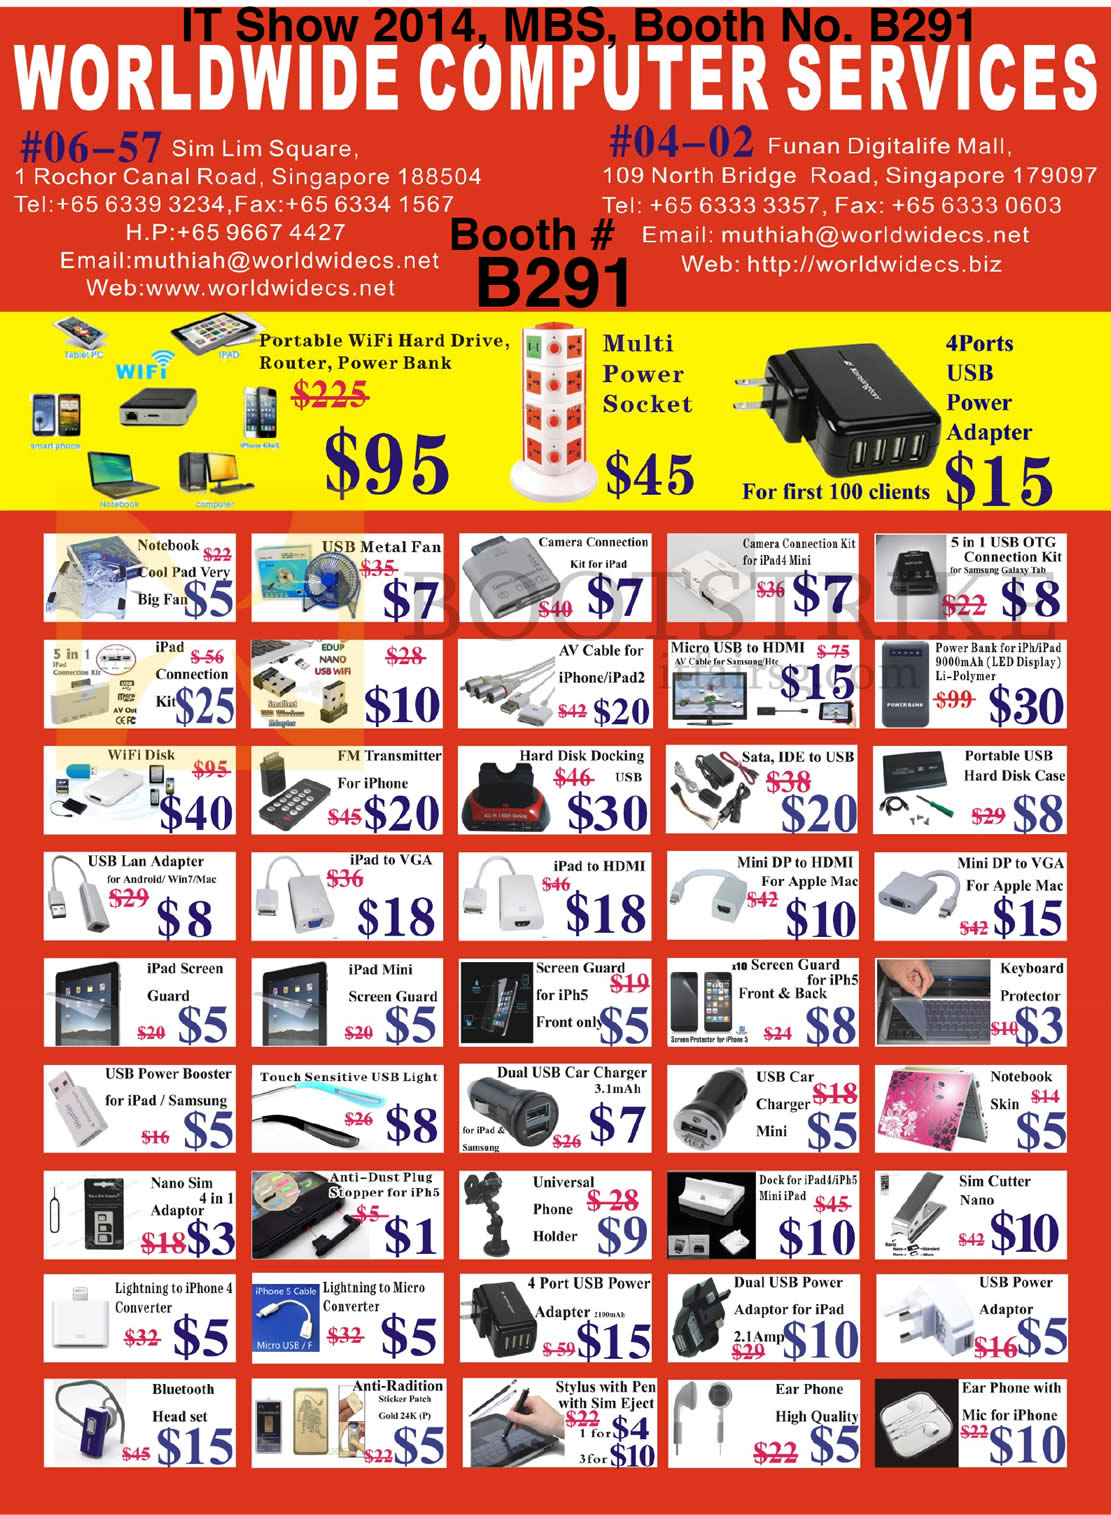 IT SHOW 2014 price list image brochure of Worldwide Computer Services Accessories, Hard Disk Docking Station, 3G Dongle, FM Transmitter, Powerbank, Notebook Cooler, Screen Protector